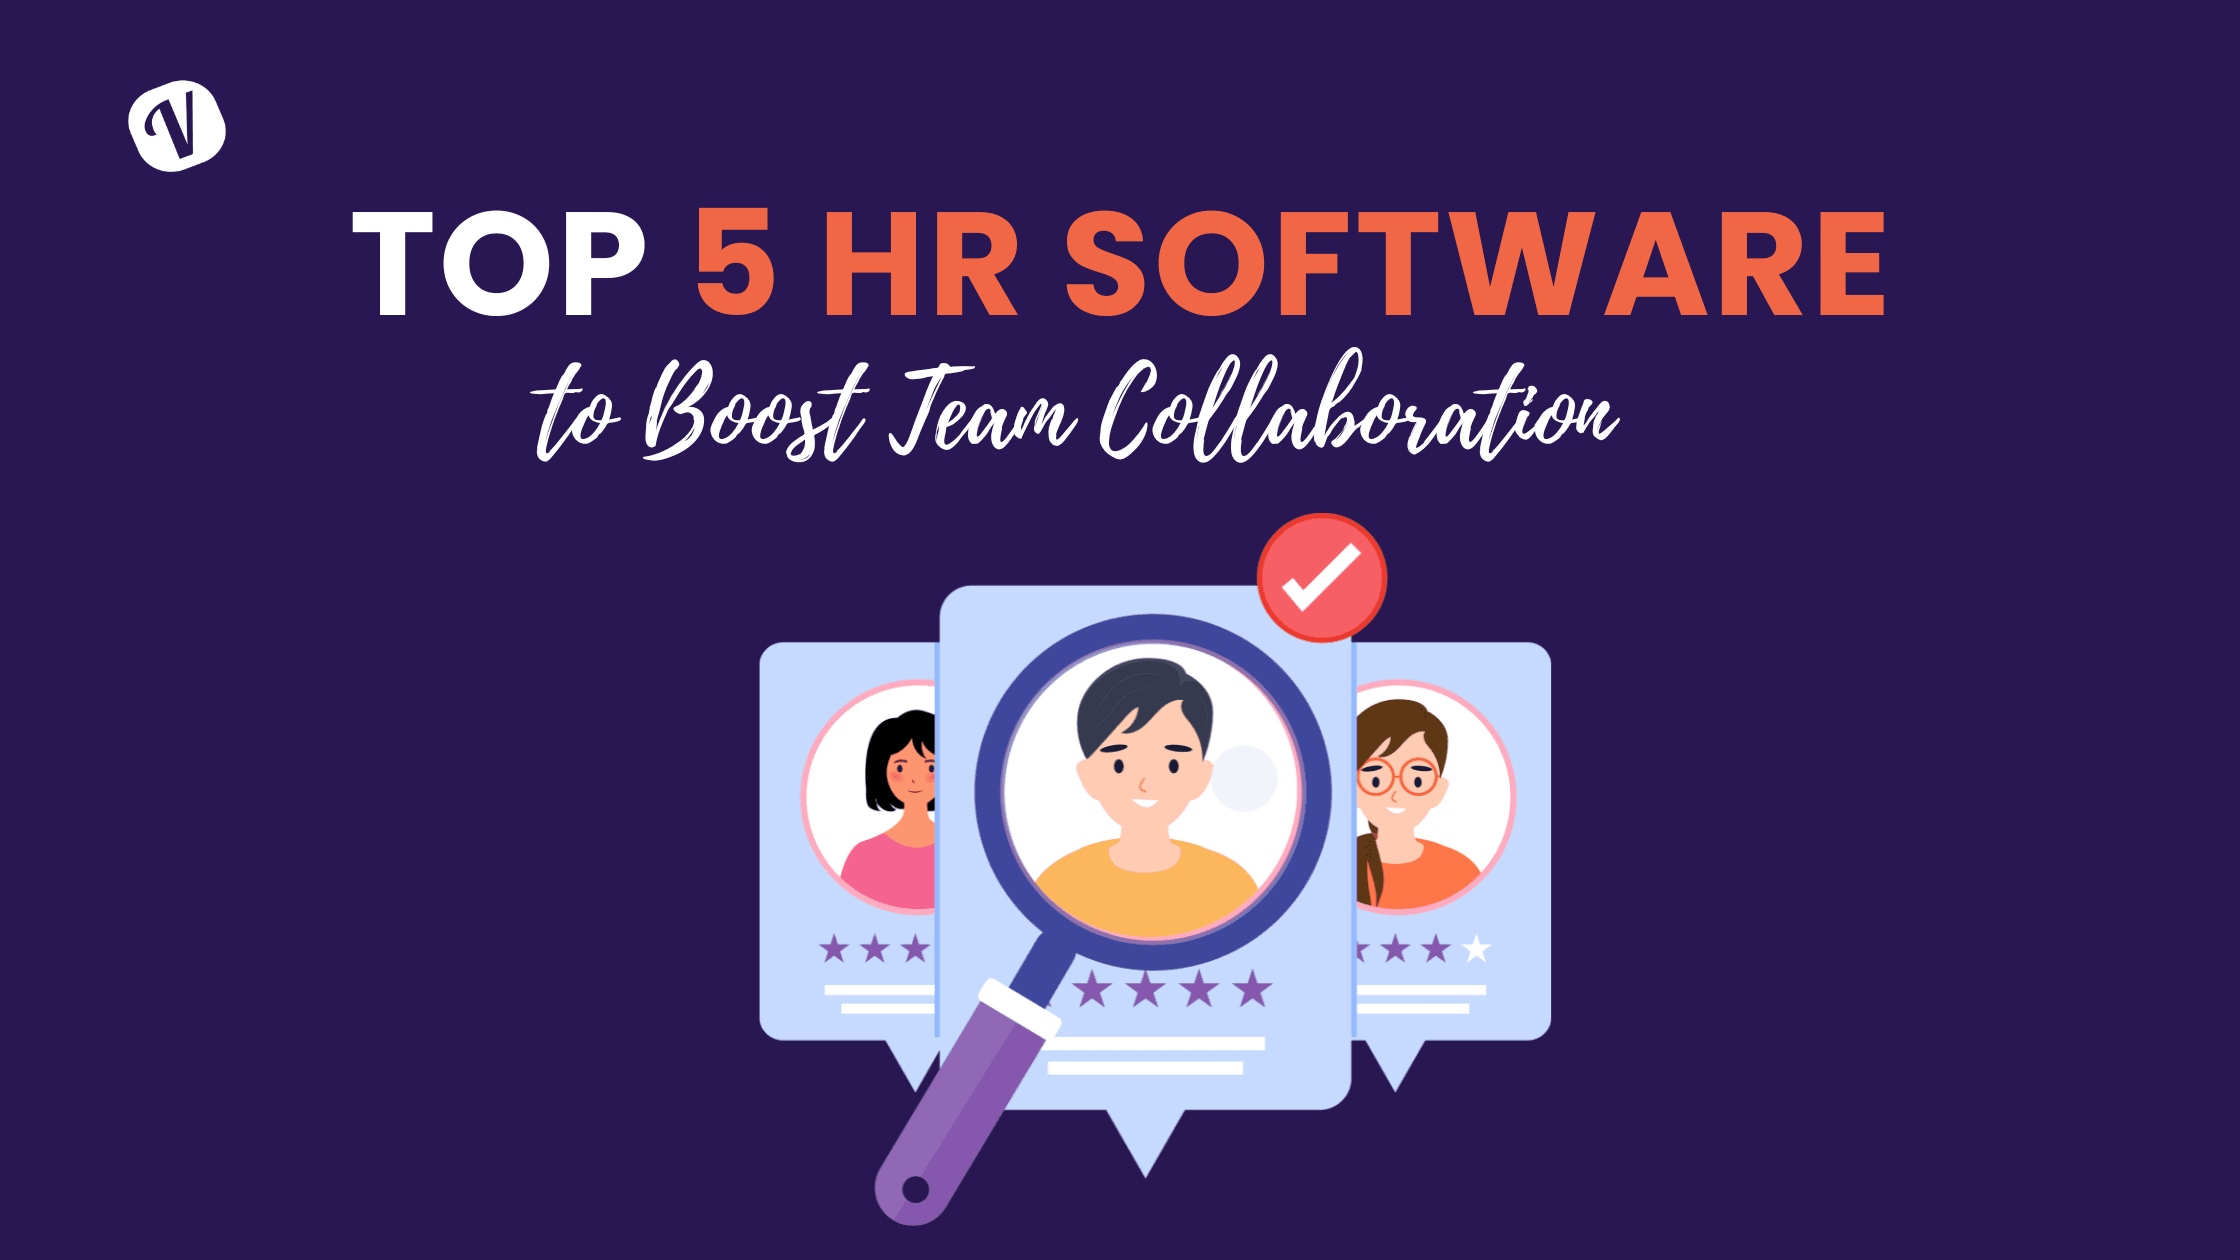 Top 5 HR Software to Boost Team Collaboration